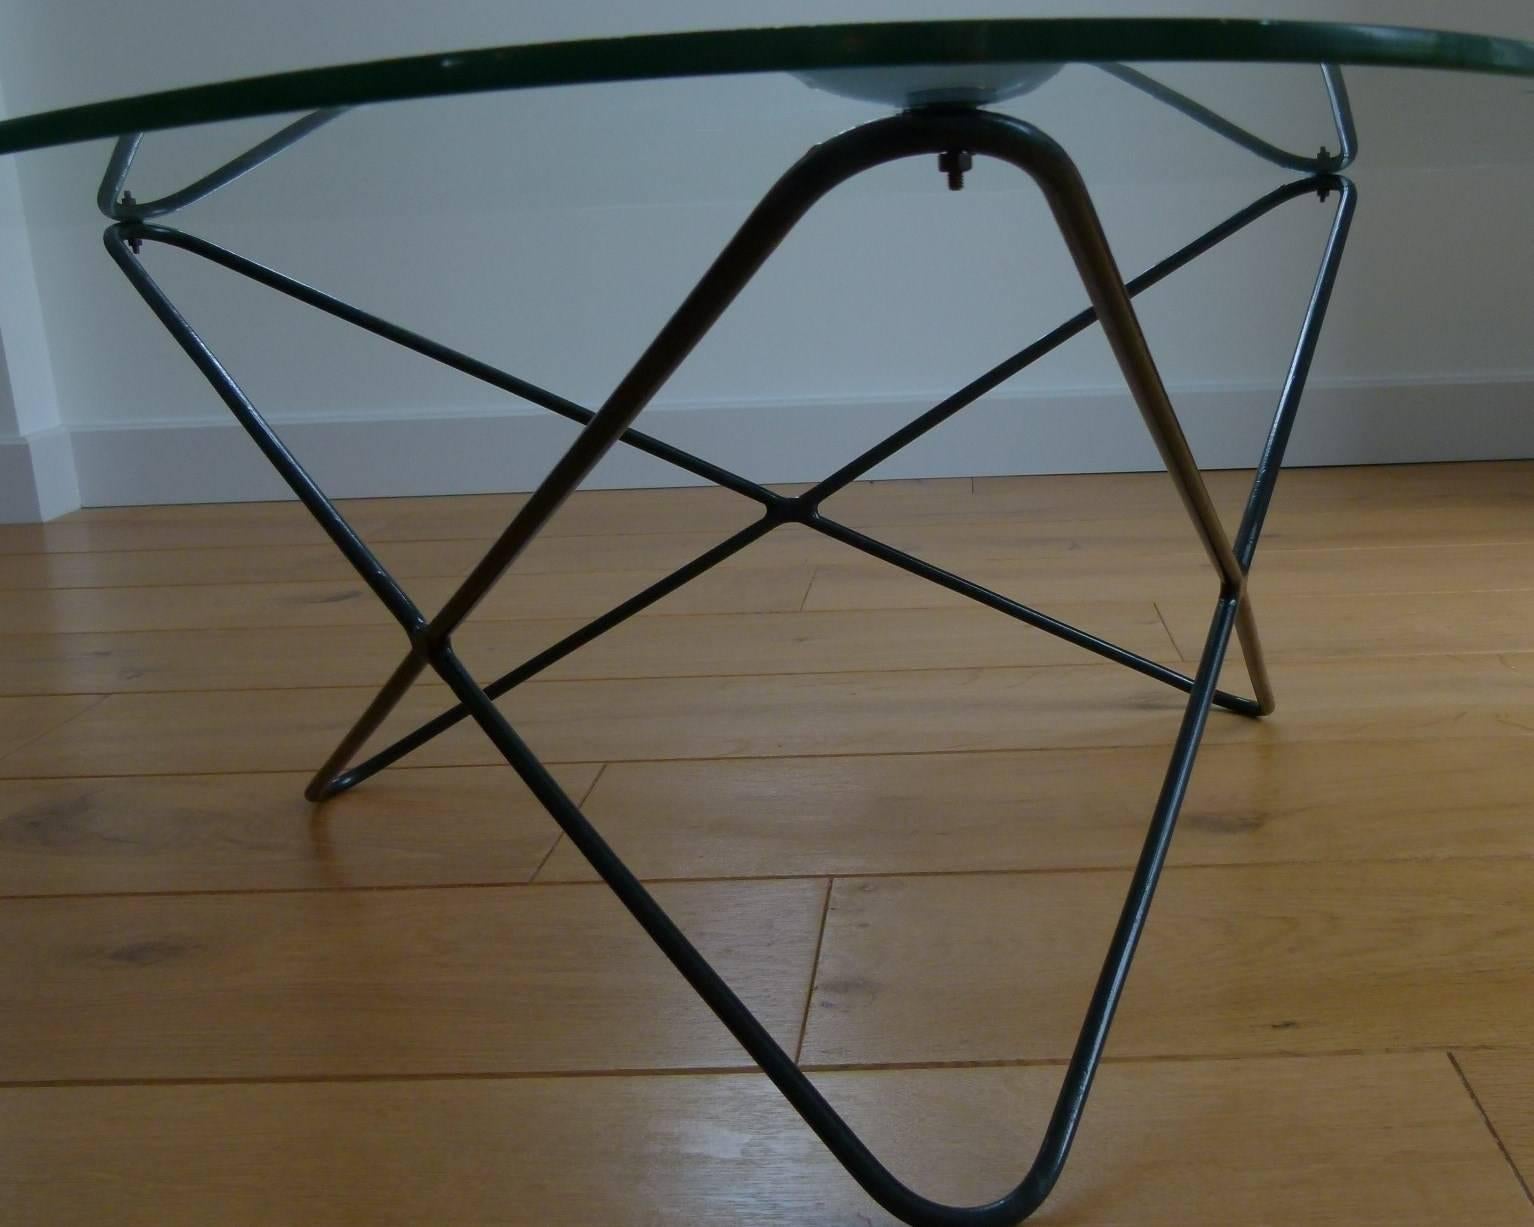 French Free Shape Coffee Table by F. Lasbleiz for Airborne, 1954